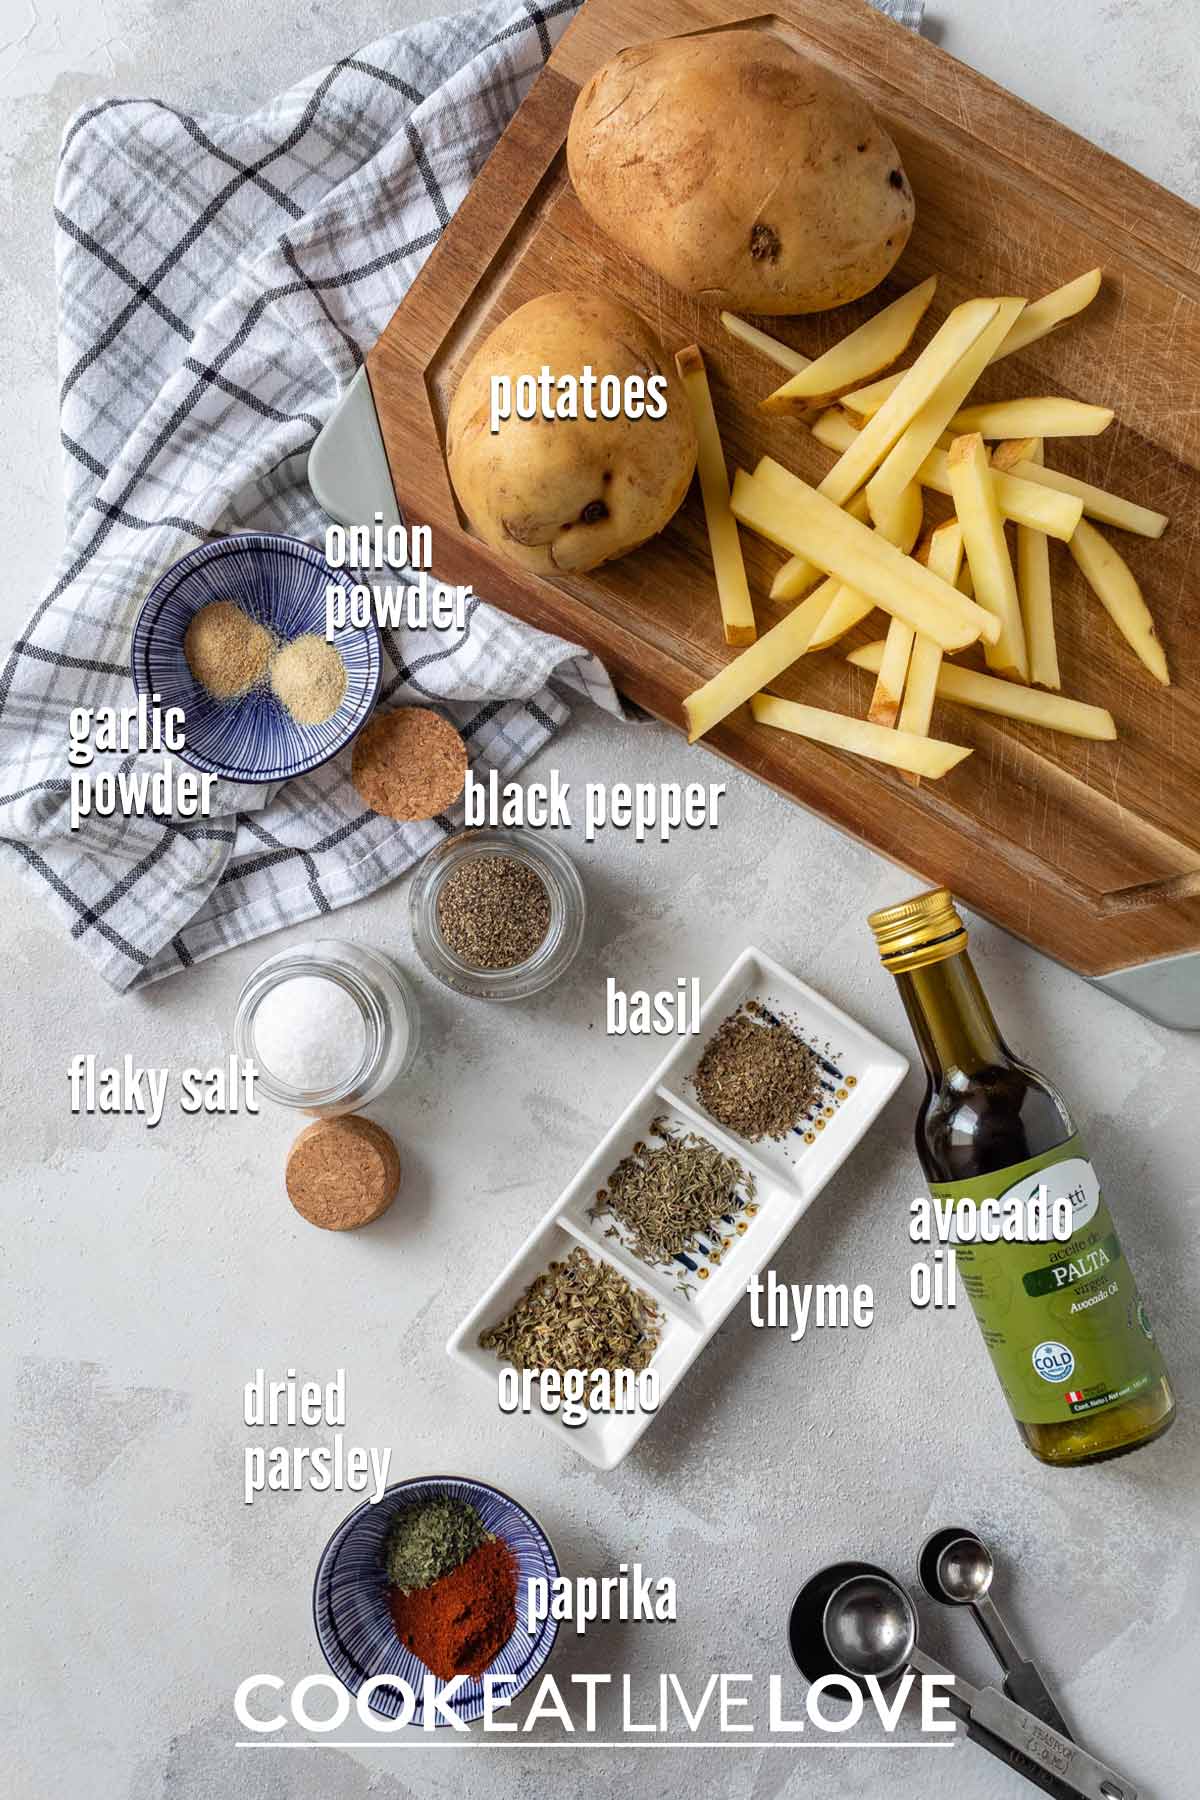 Ingredients to make oven baked french fries on the table.